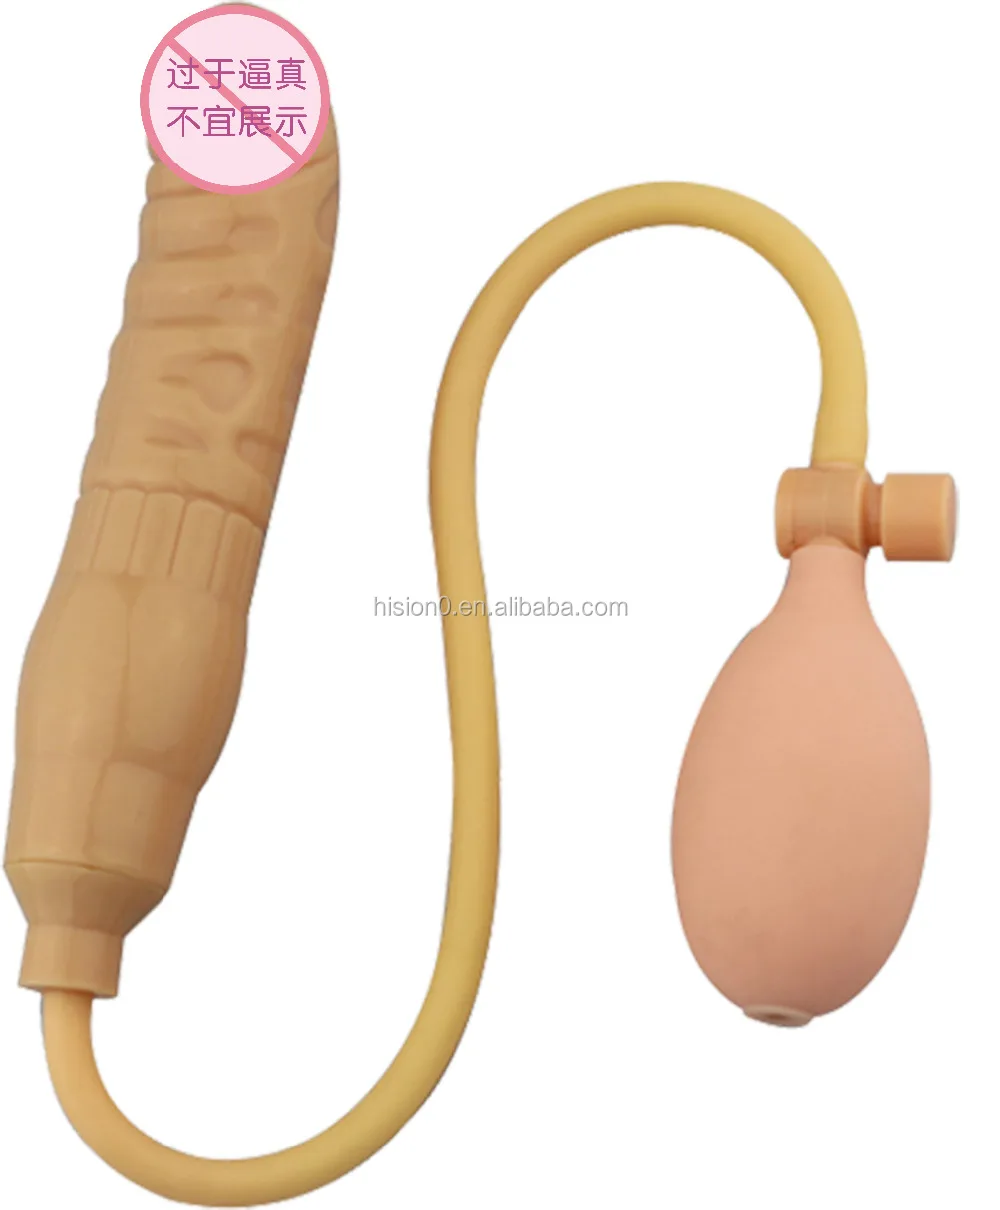 Source Silicone Inflatable Hollow Long Vaginal Butt Plug for Men or Women Anal Sex Toys on m.alibaba pic